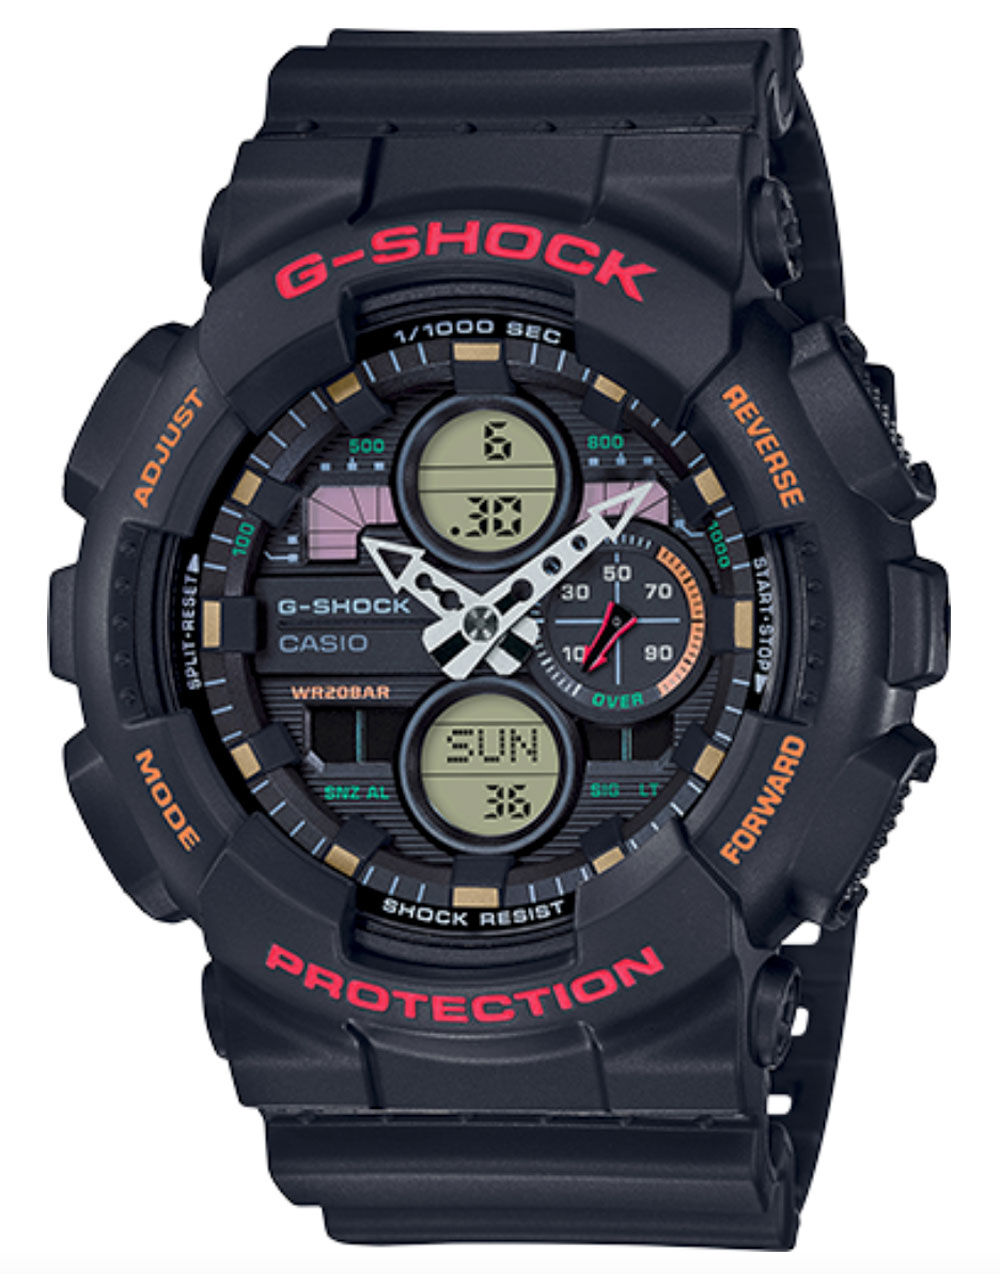 Casio: G-Shock GA140 90's Collection Ana-Digi Black Red
Features: Speed Measurement, 1/1000 Second Stopwatch Measuring Elapsed Time,
Split Time, 1st & 2nd Place Times, ISO 764 Class Magnetic Resistant

Specifications: Module: 5612
LED
Shock Resistan